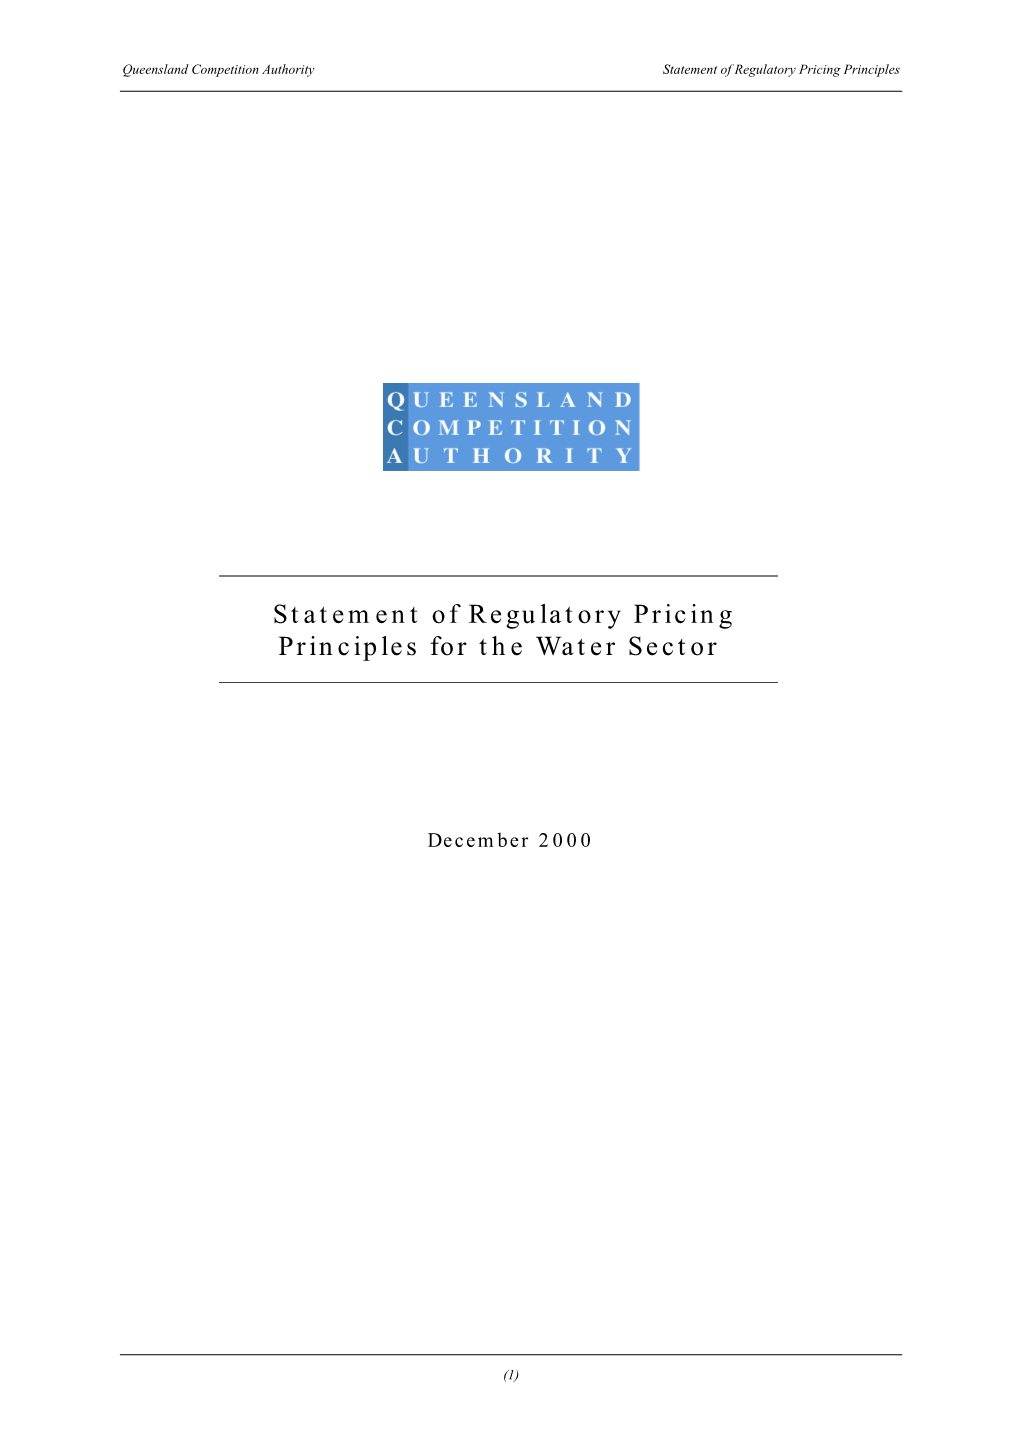 Statement of Regulatory Pricing Principles for the Water Sector